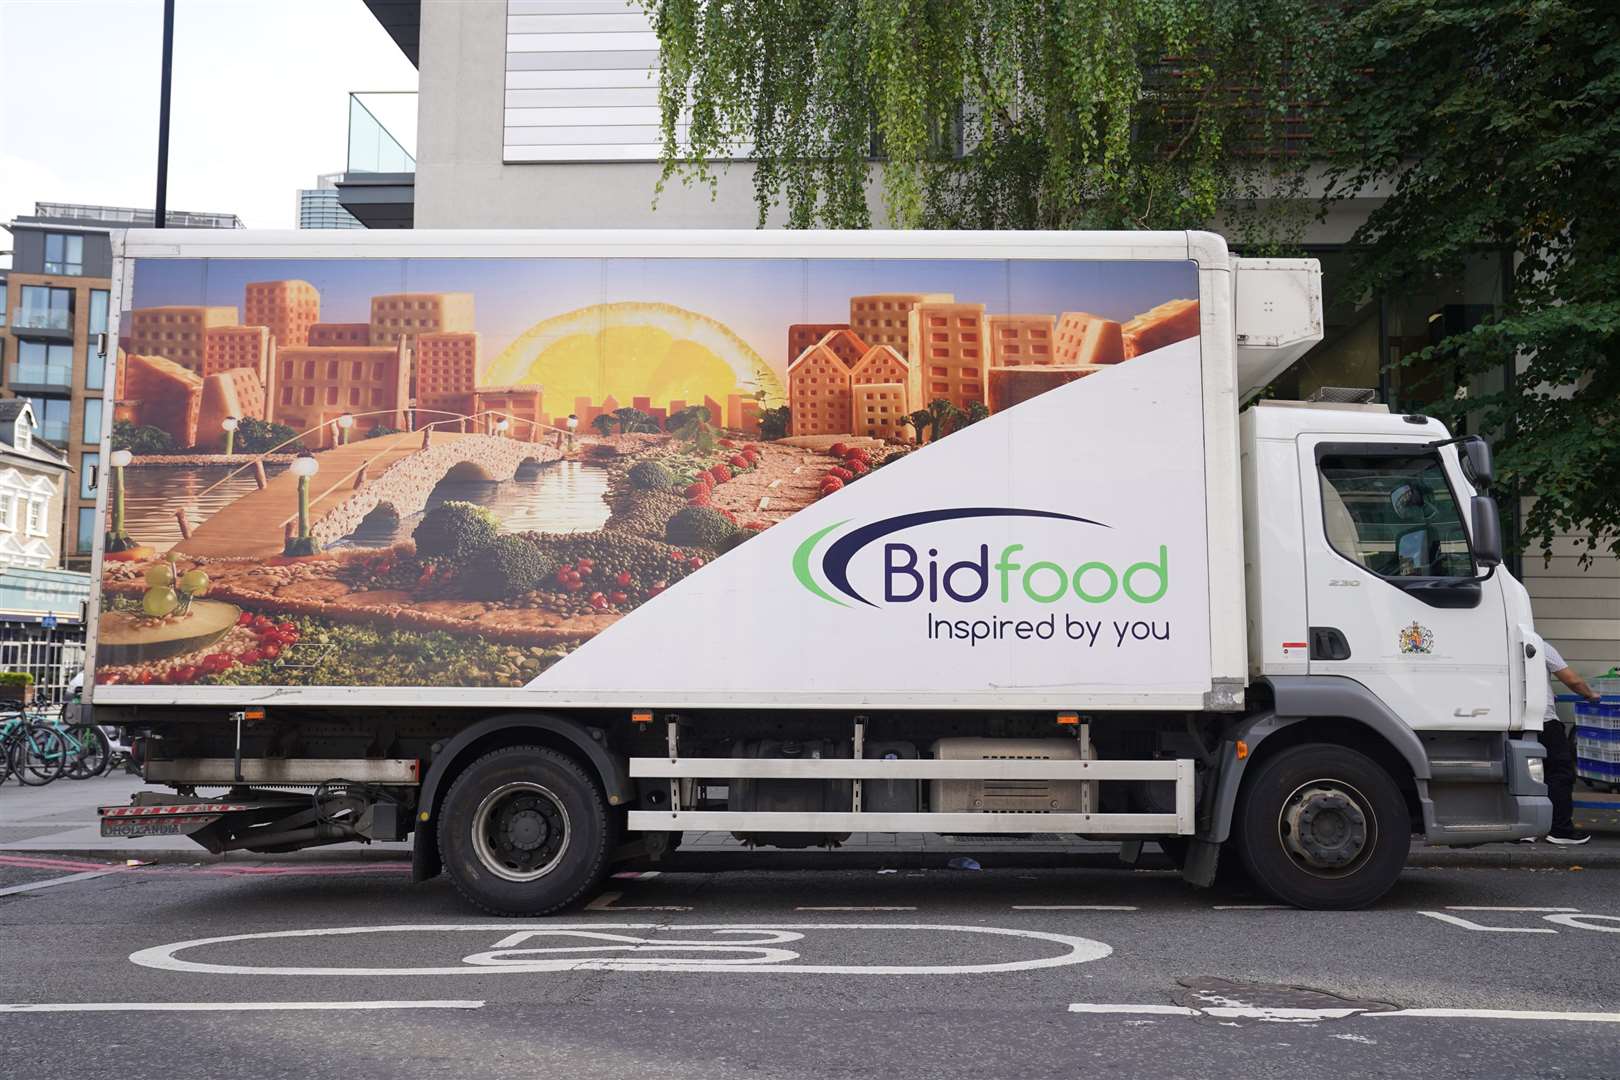 Police believe Khalife escaped by strapping himself to the underside of a BidFood lorry (Lucy North/PA)